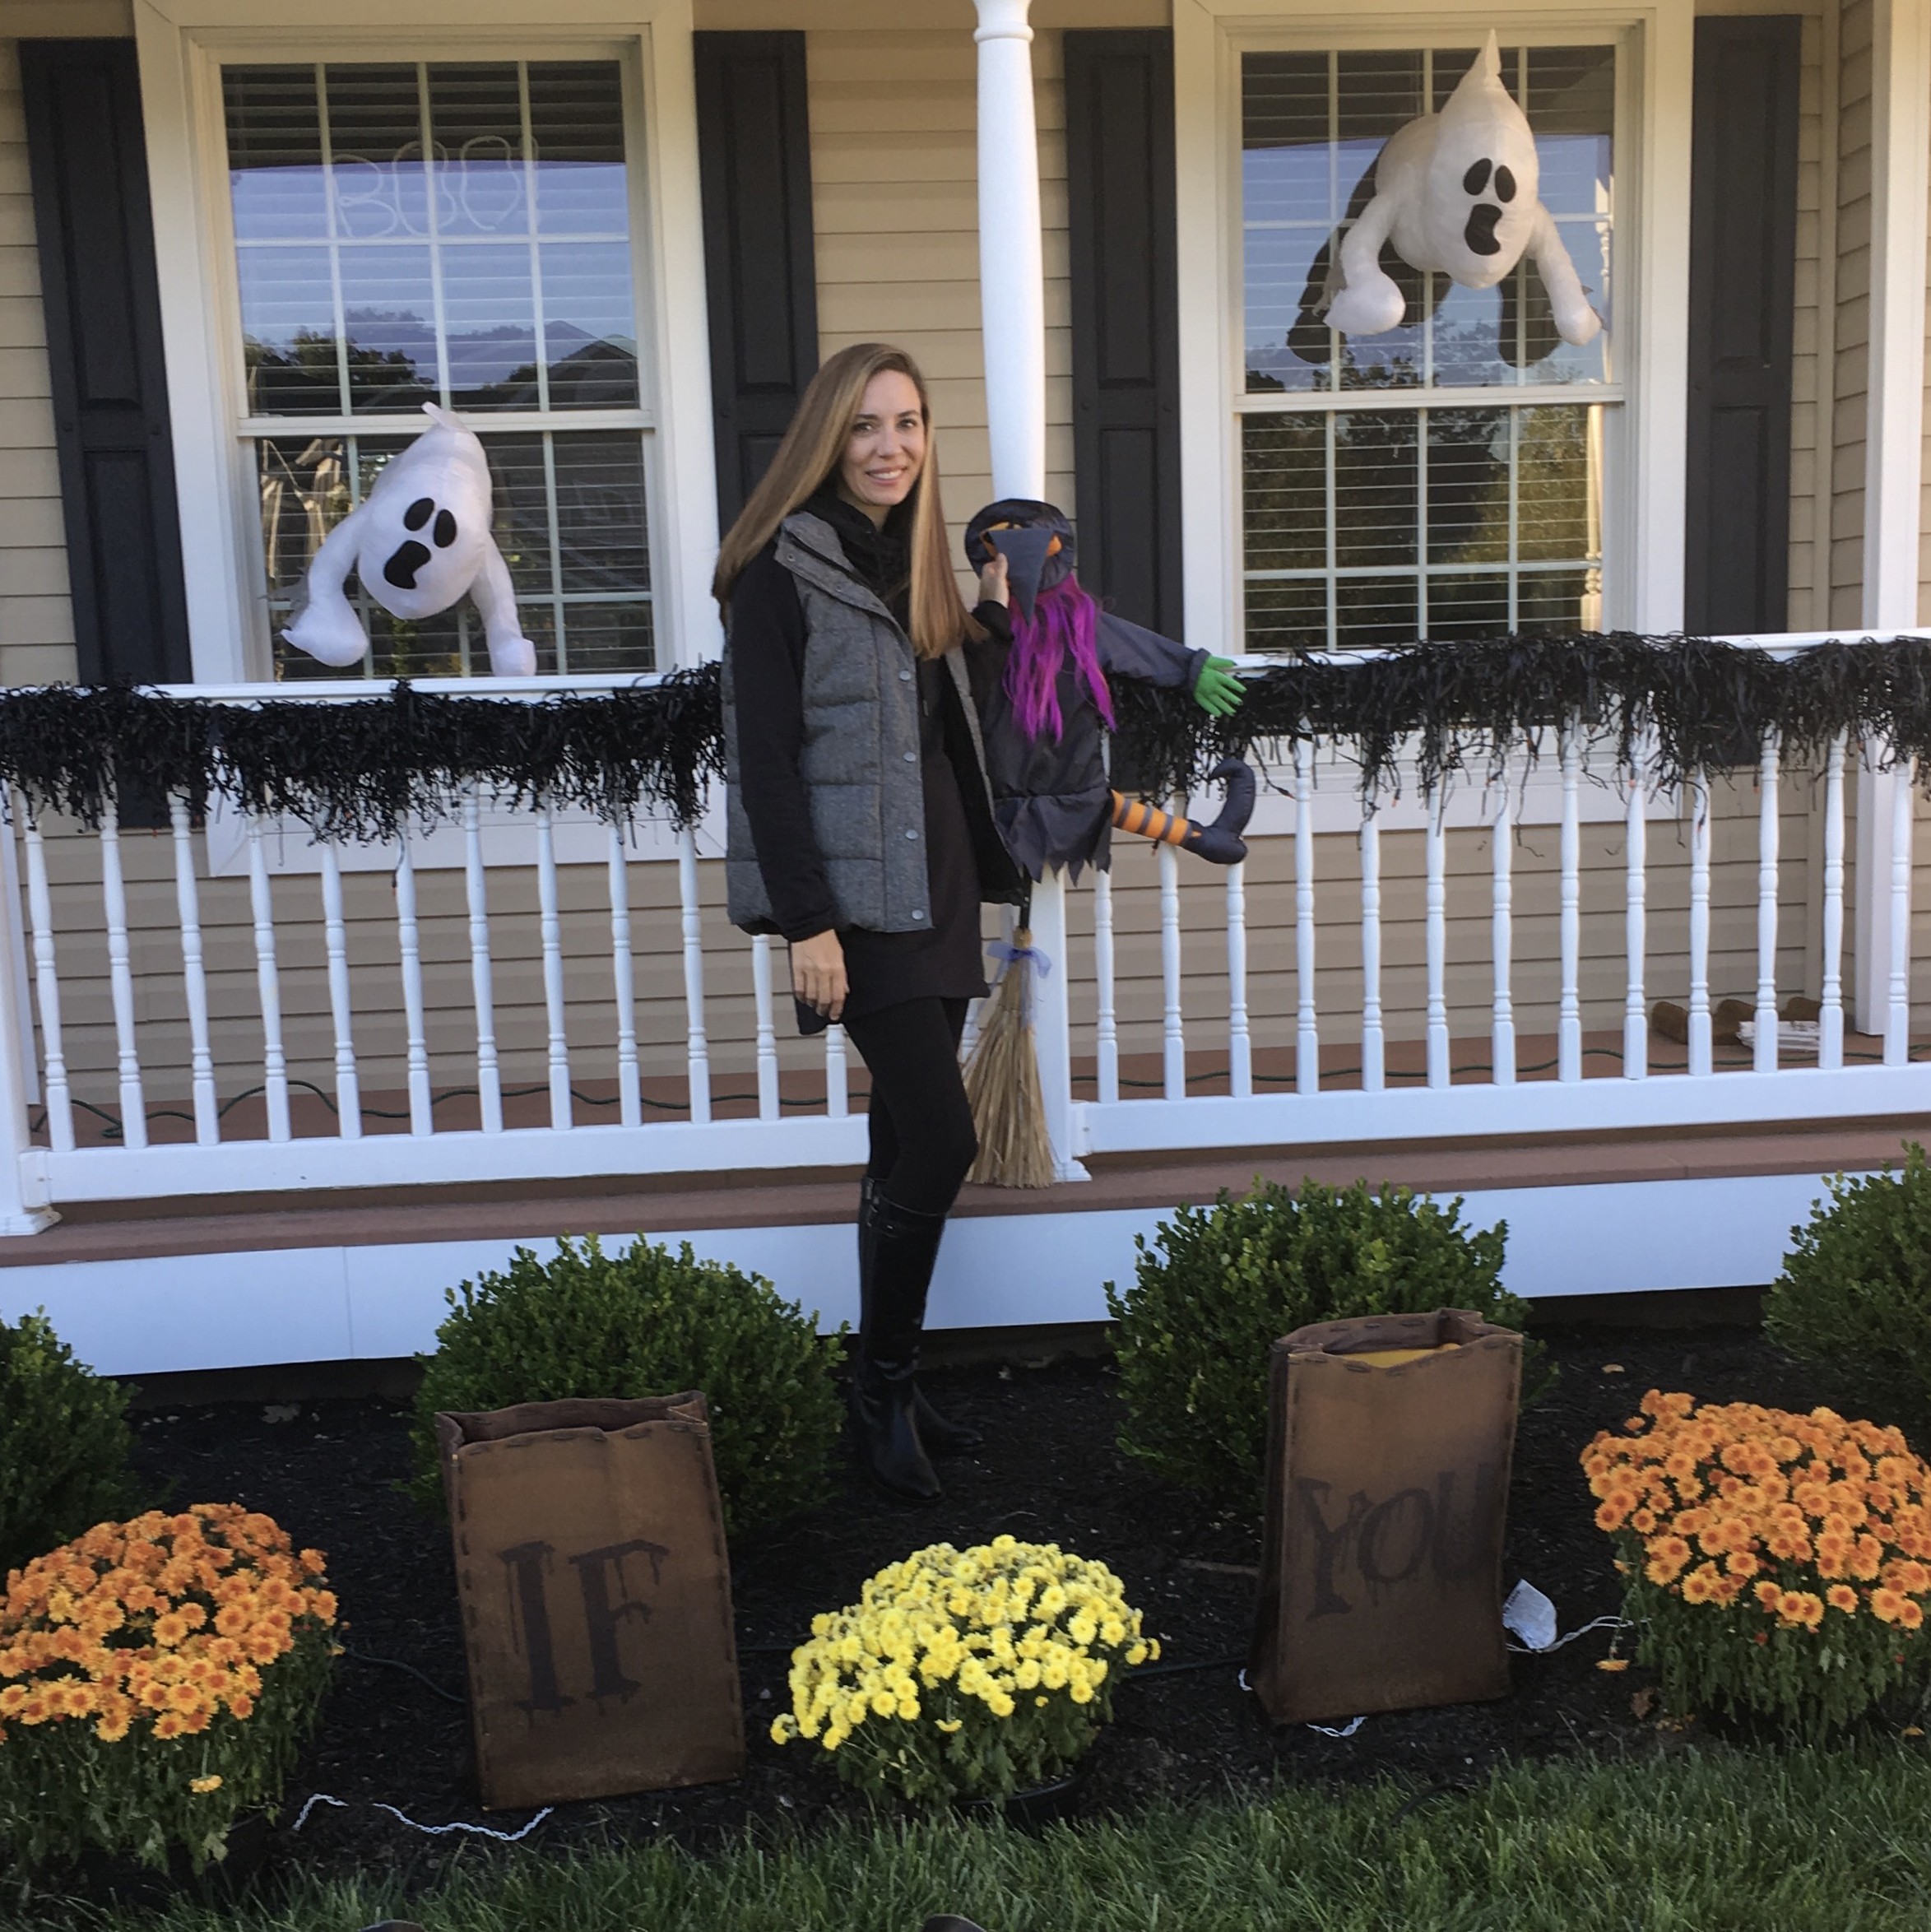 Decorating the house for halloween